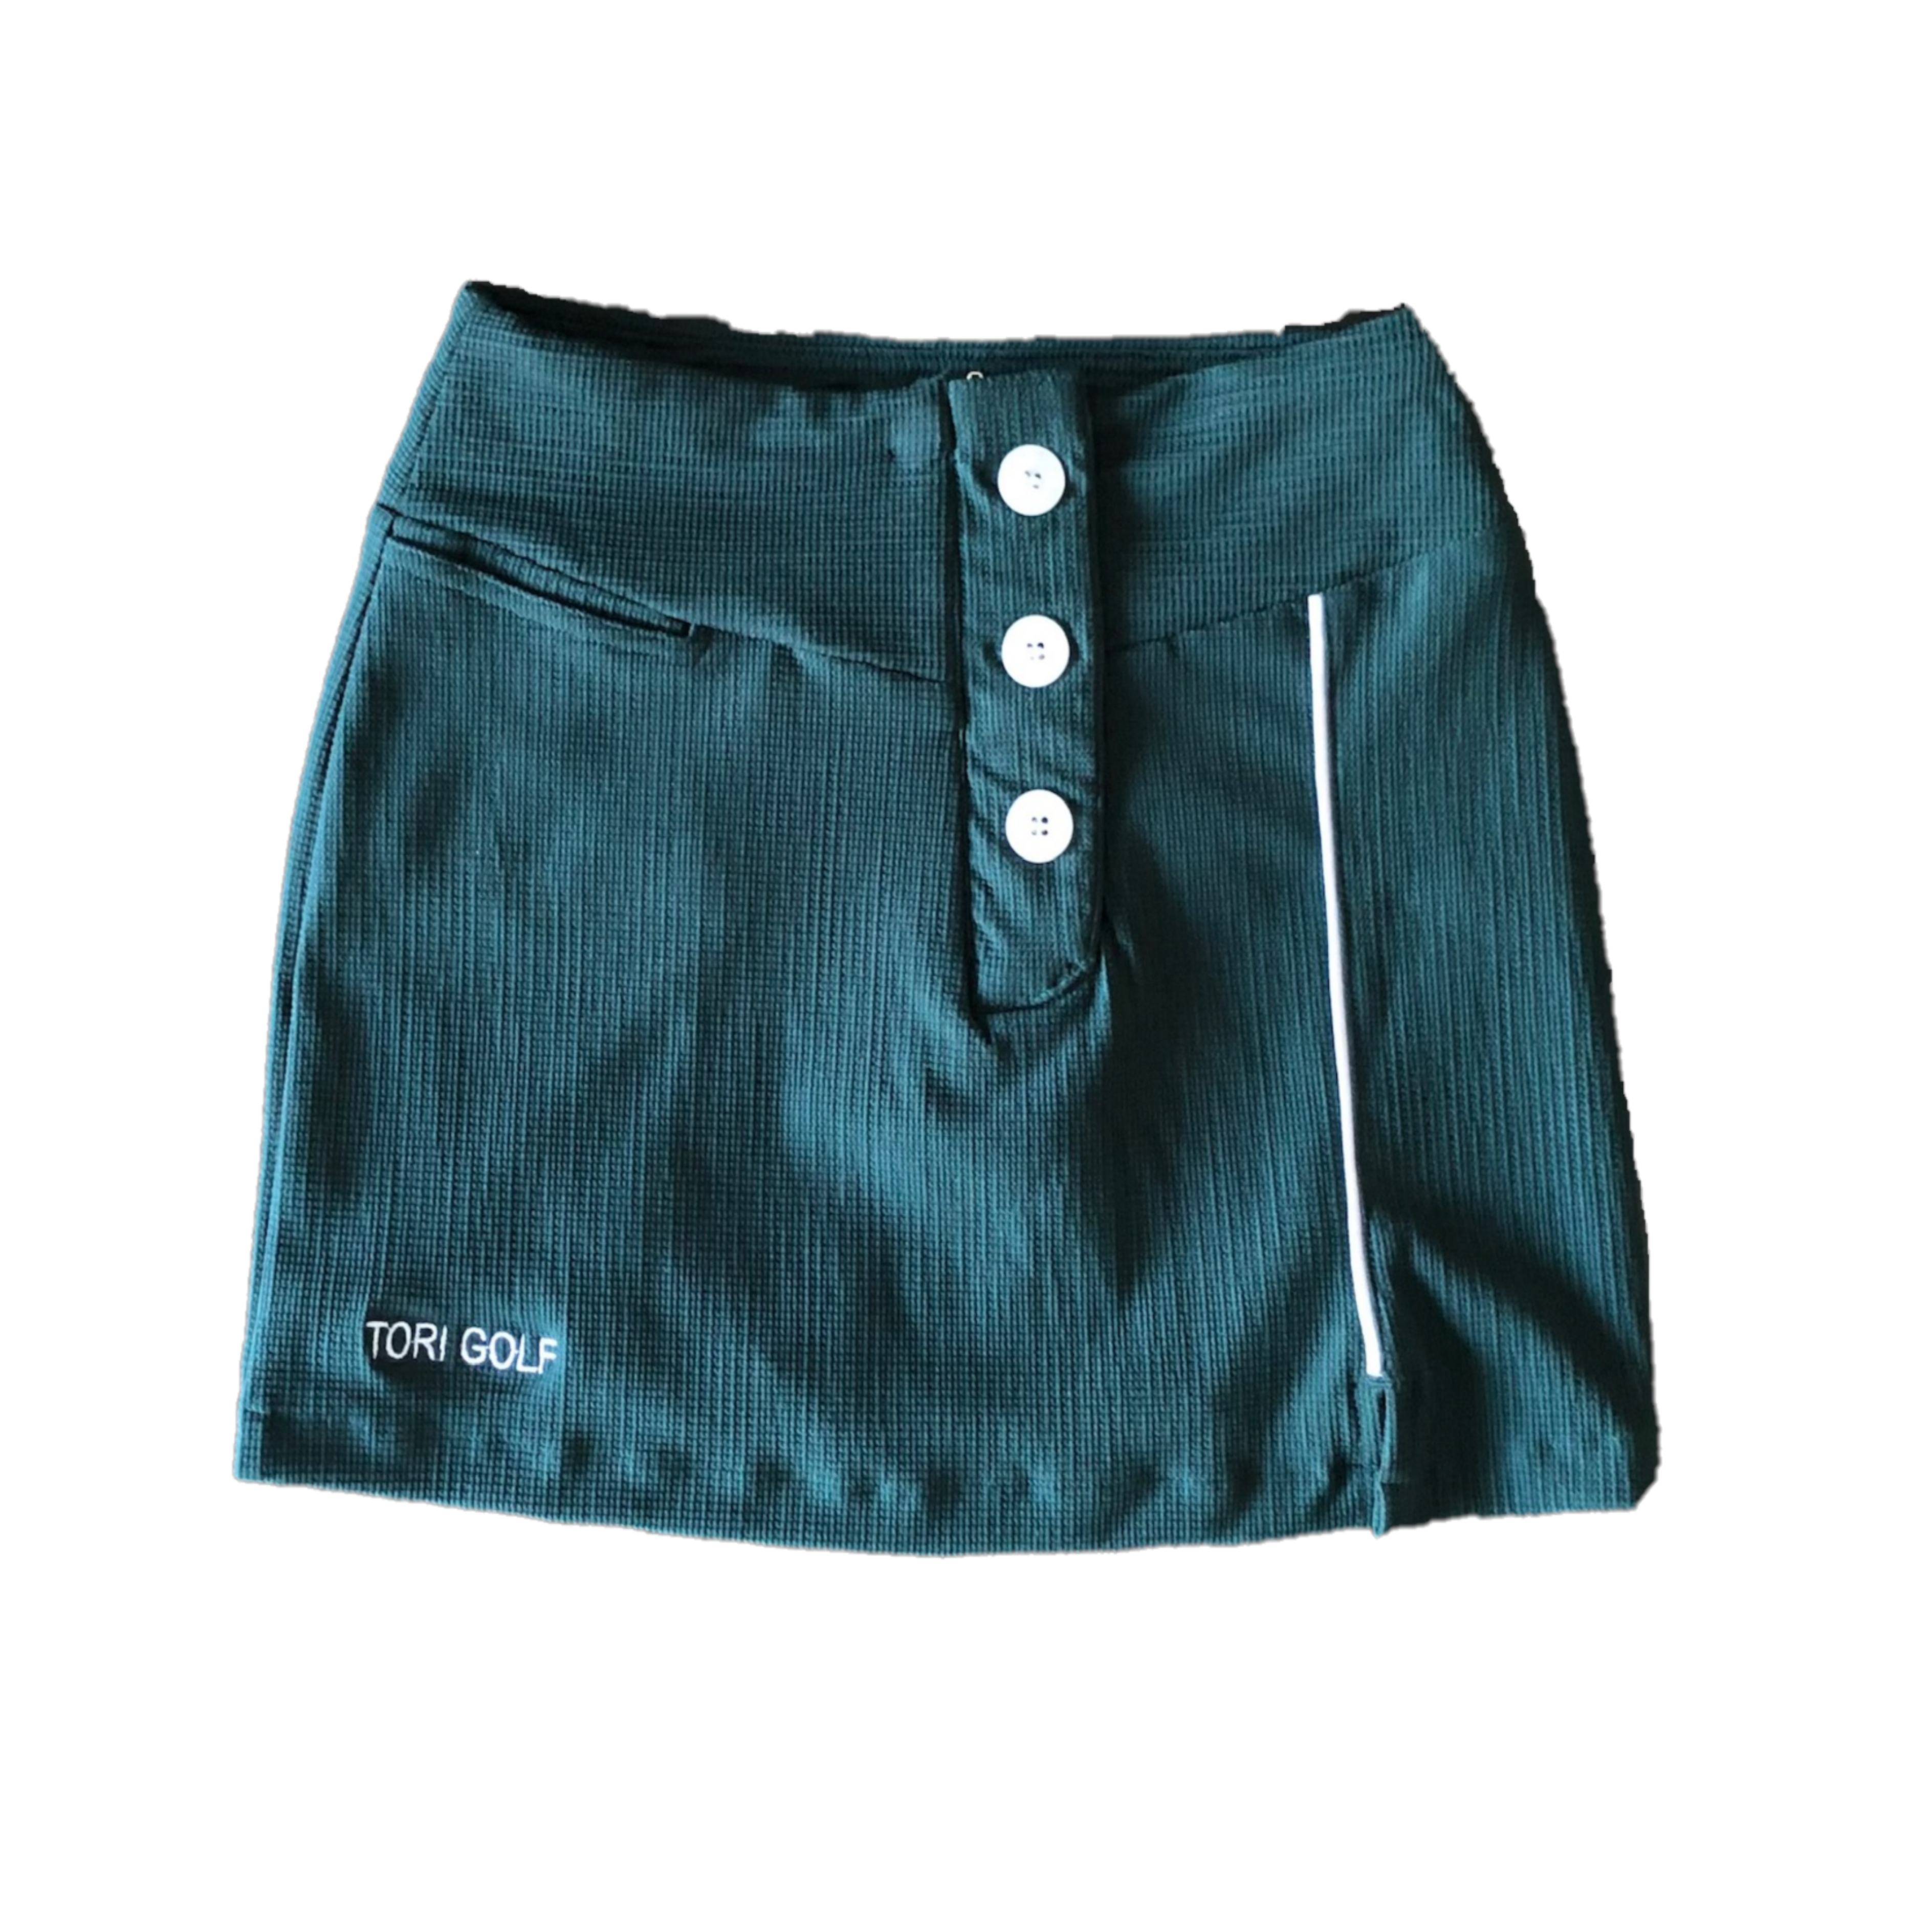 LS-063C || Ladies Skirt Bottle Green Hessian Texture With One White Pipes Vert Stripe 3  Buttons Concealing Zip Fastening 2 Rear Pockets One Front Pocket